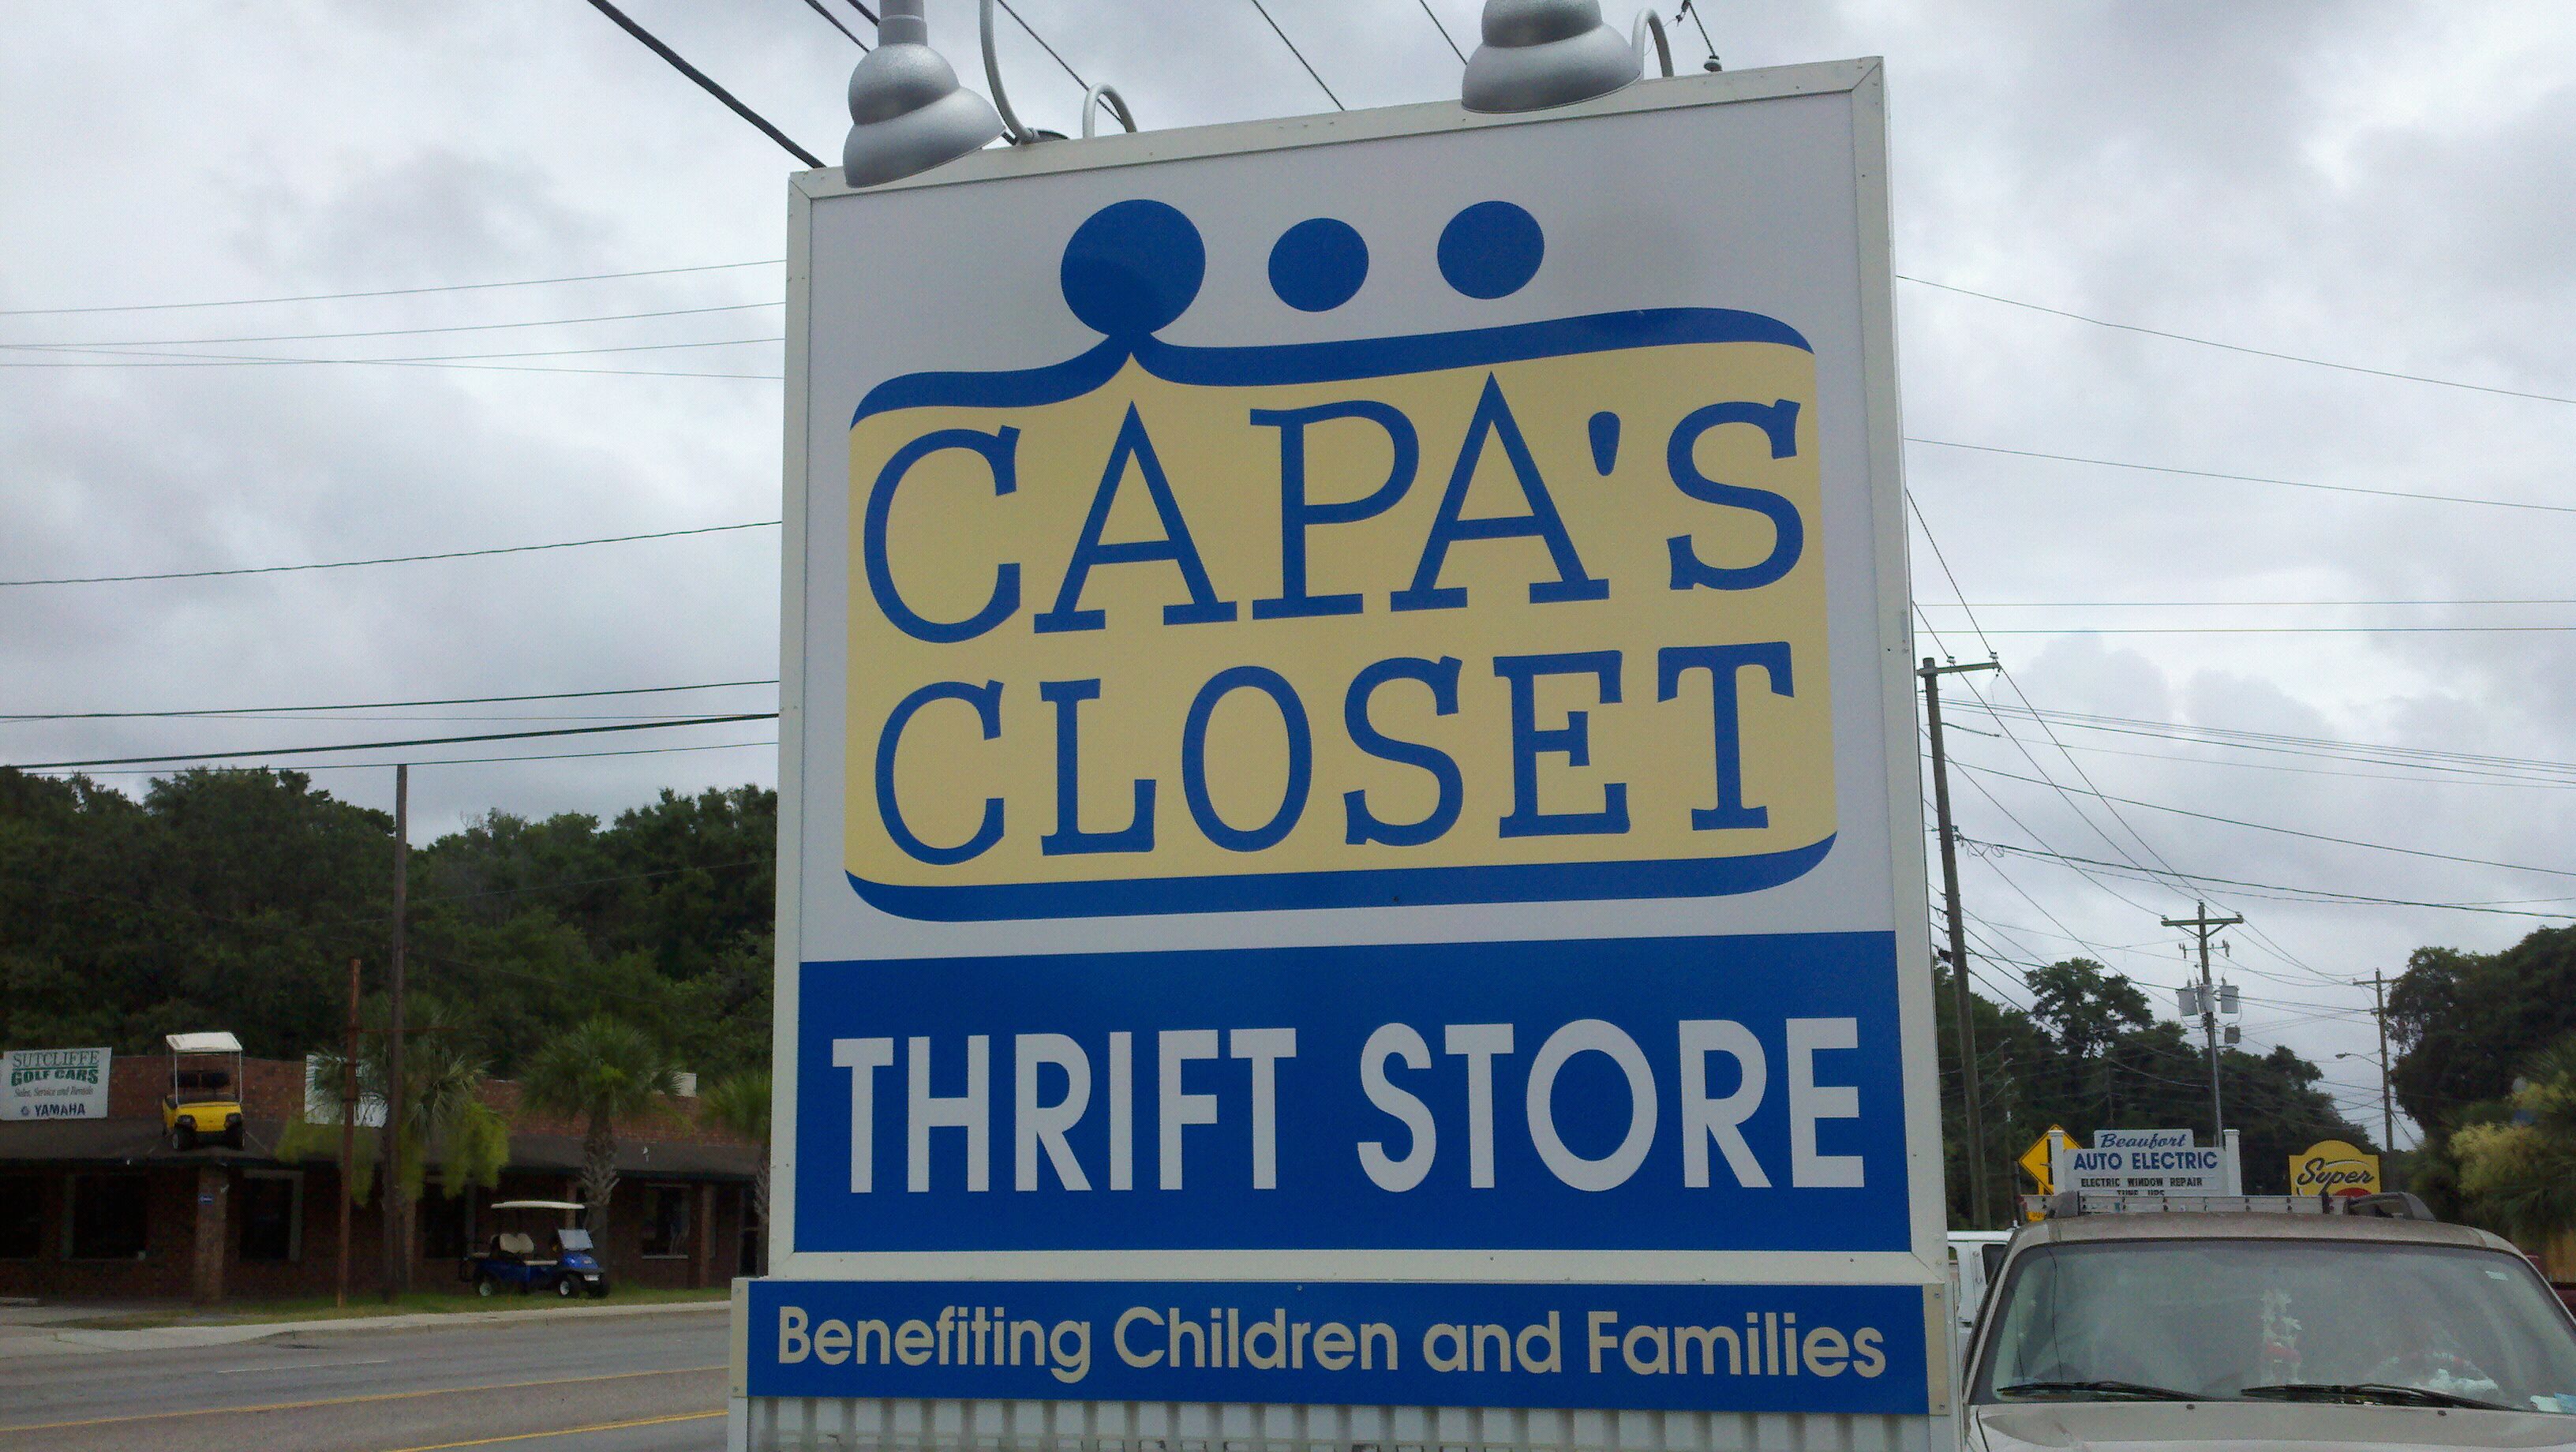 The proceeds from CAPA's Closet provide roughly 50% of the operating capital for the organization